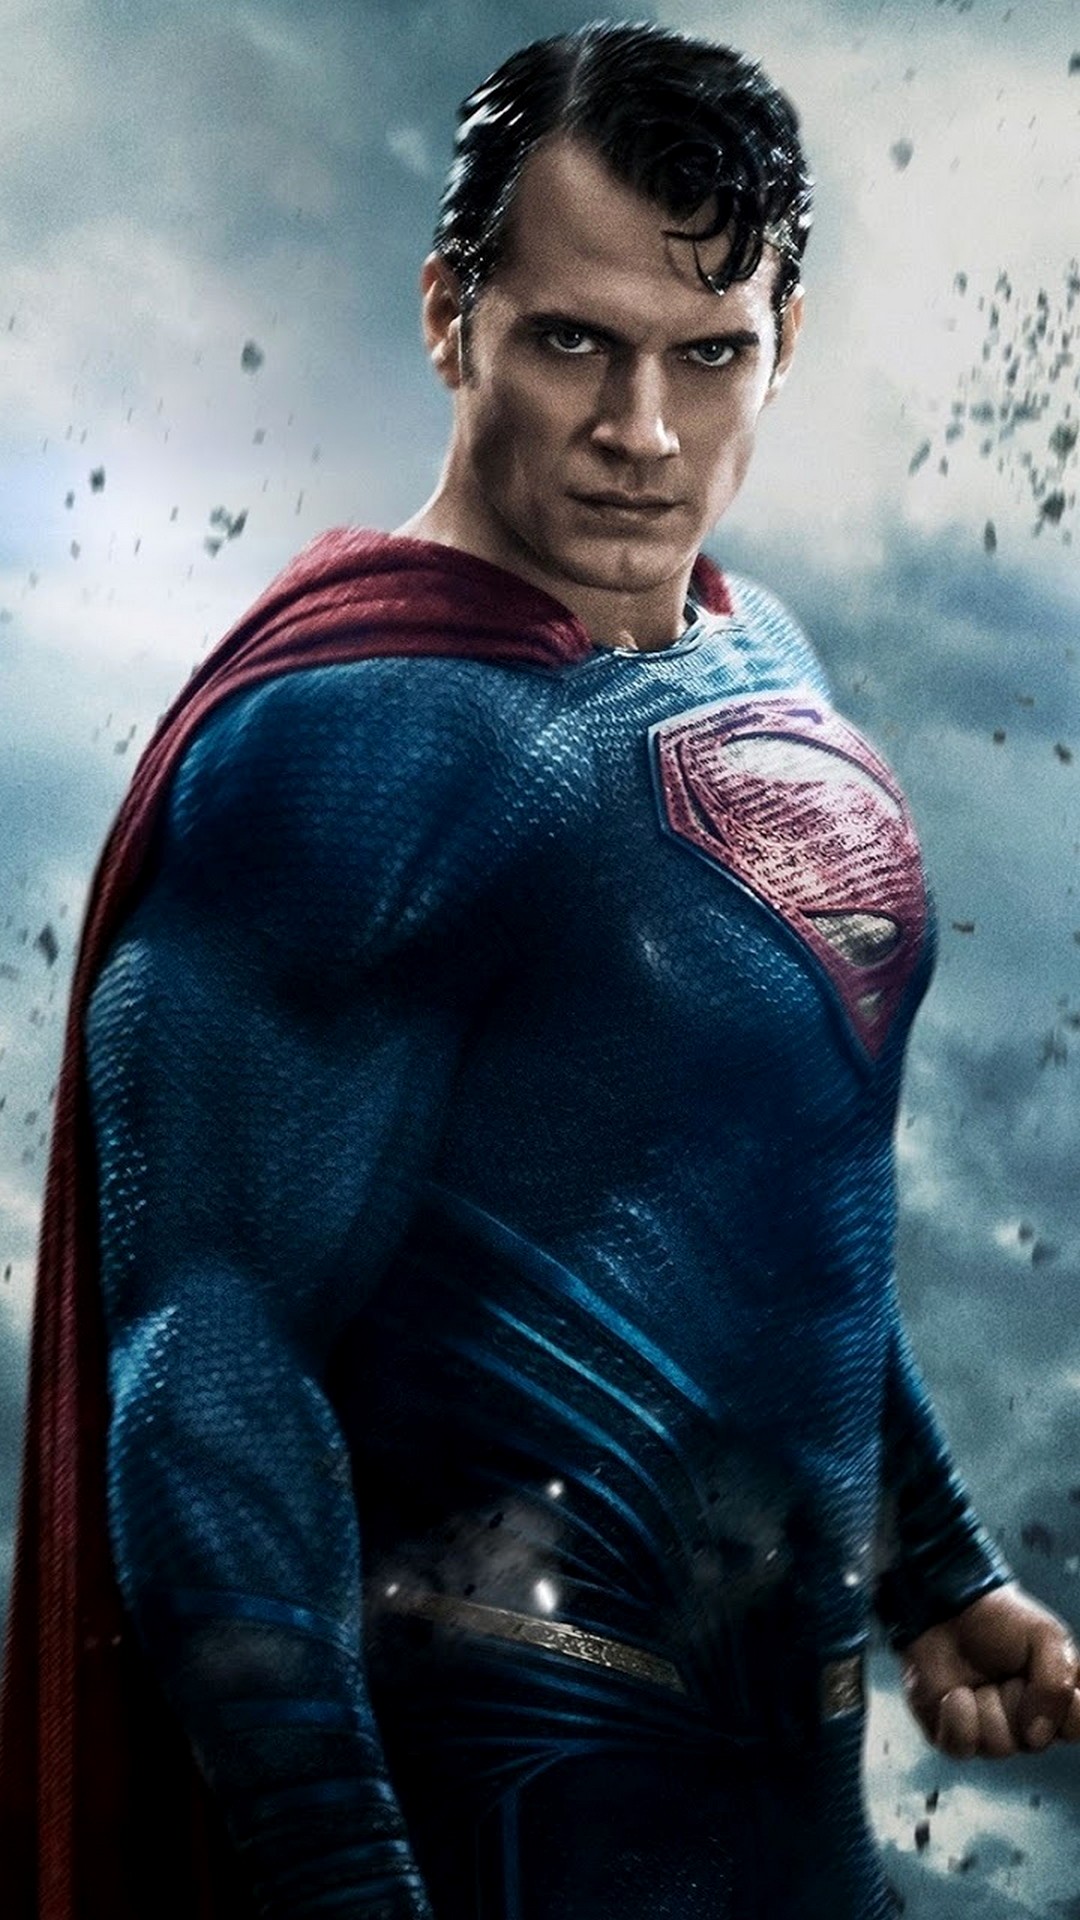 Superman Android Wallpaper with high-resolution 1080x1920 pixel. You can use this poster wallpaper for your Desktop Computers, Mac Screensavers, Windows Backgrounds, iPhone Wallpapers, Tablet or Android Lock screen and another Mobile device